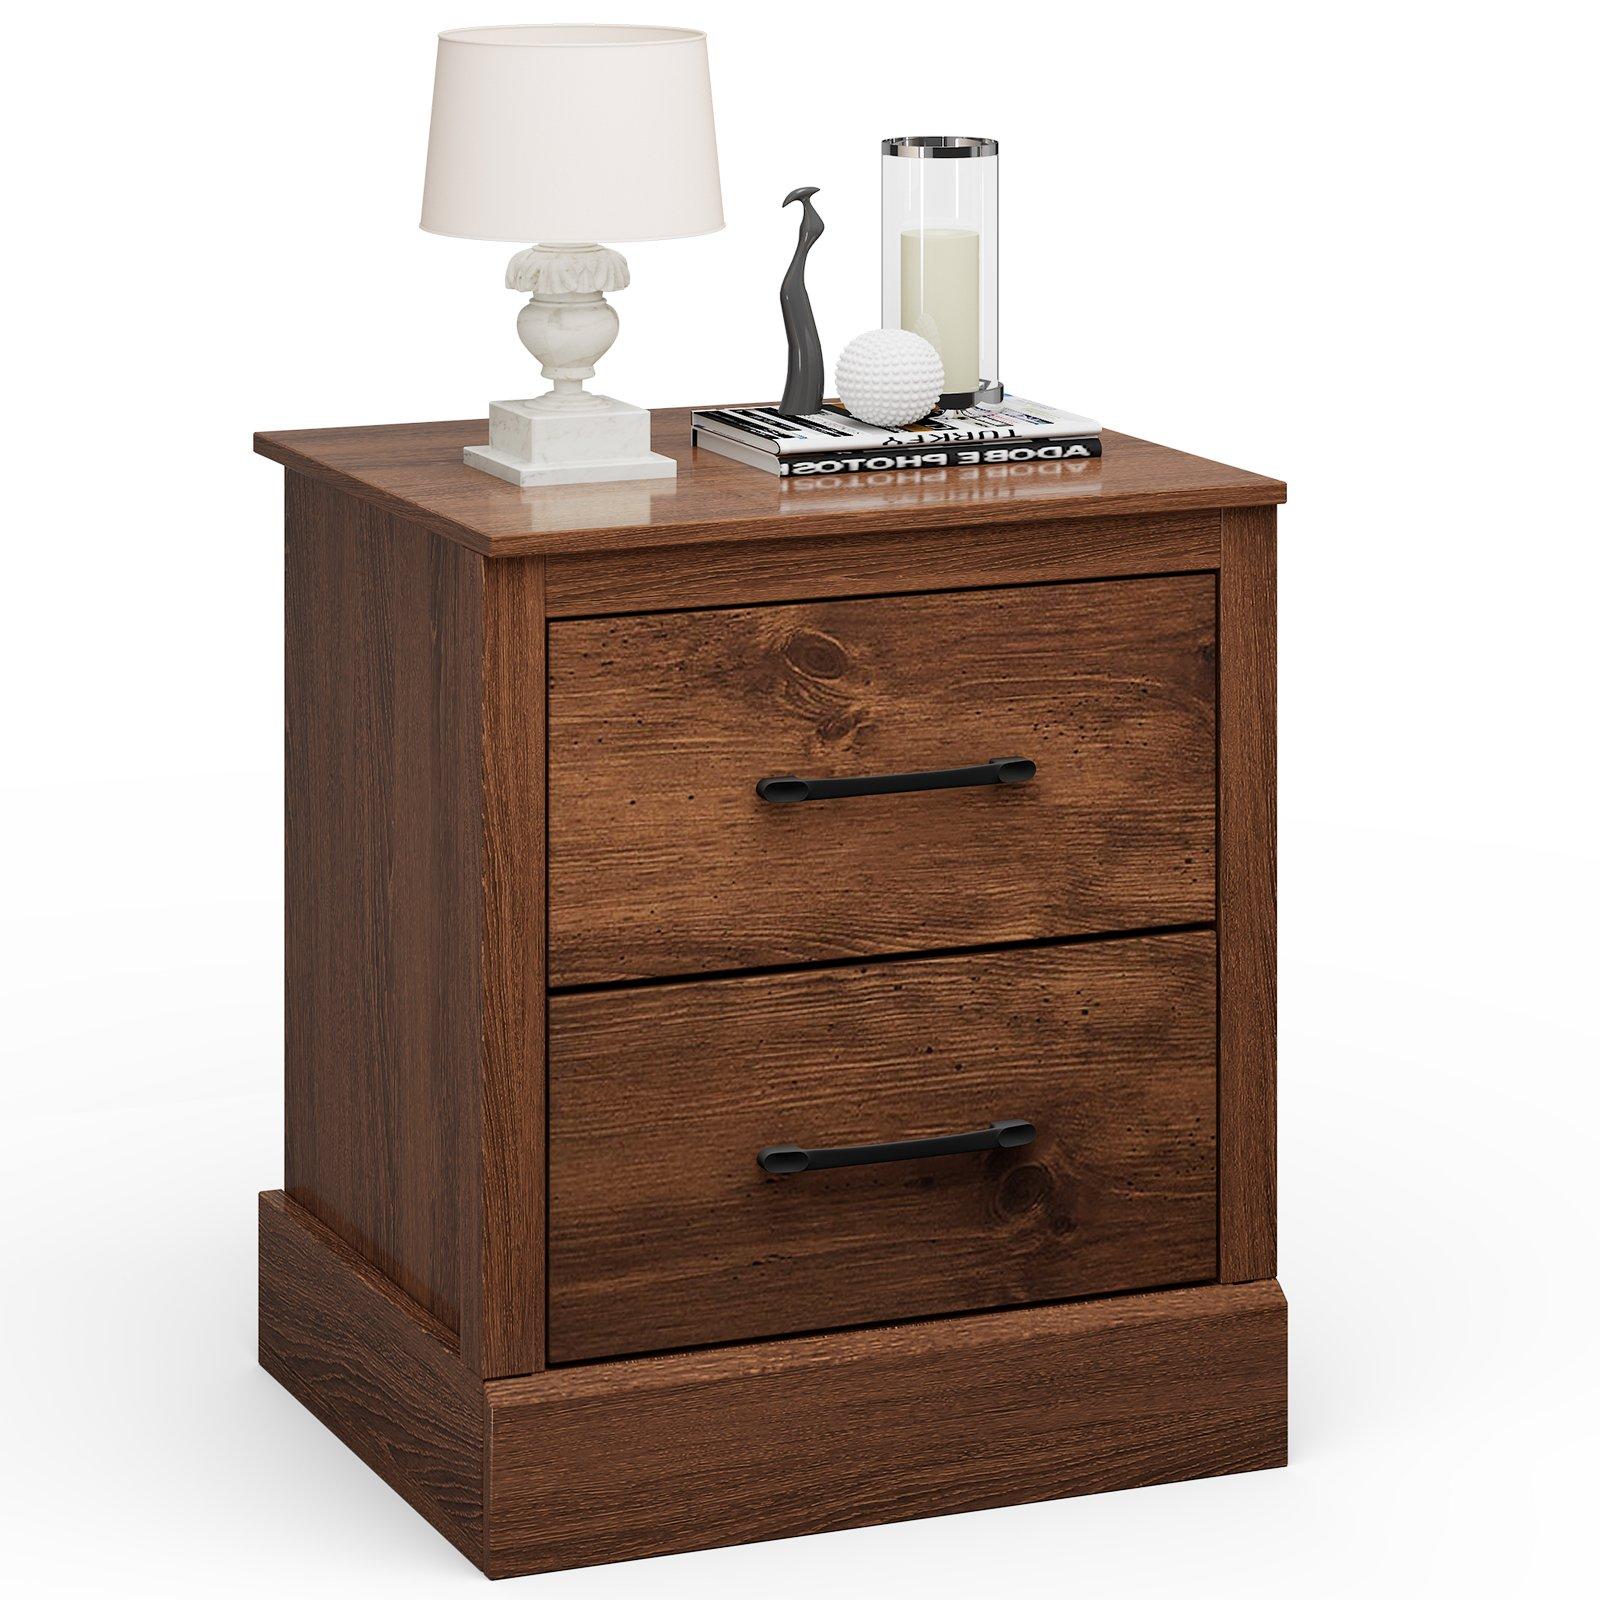 2 Drawer Nightstand Bedside Table Compact Sofa End Table Rustic Walnut